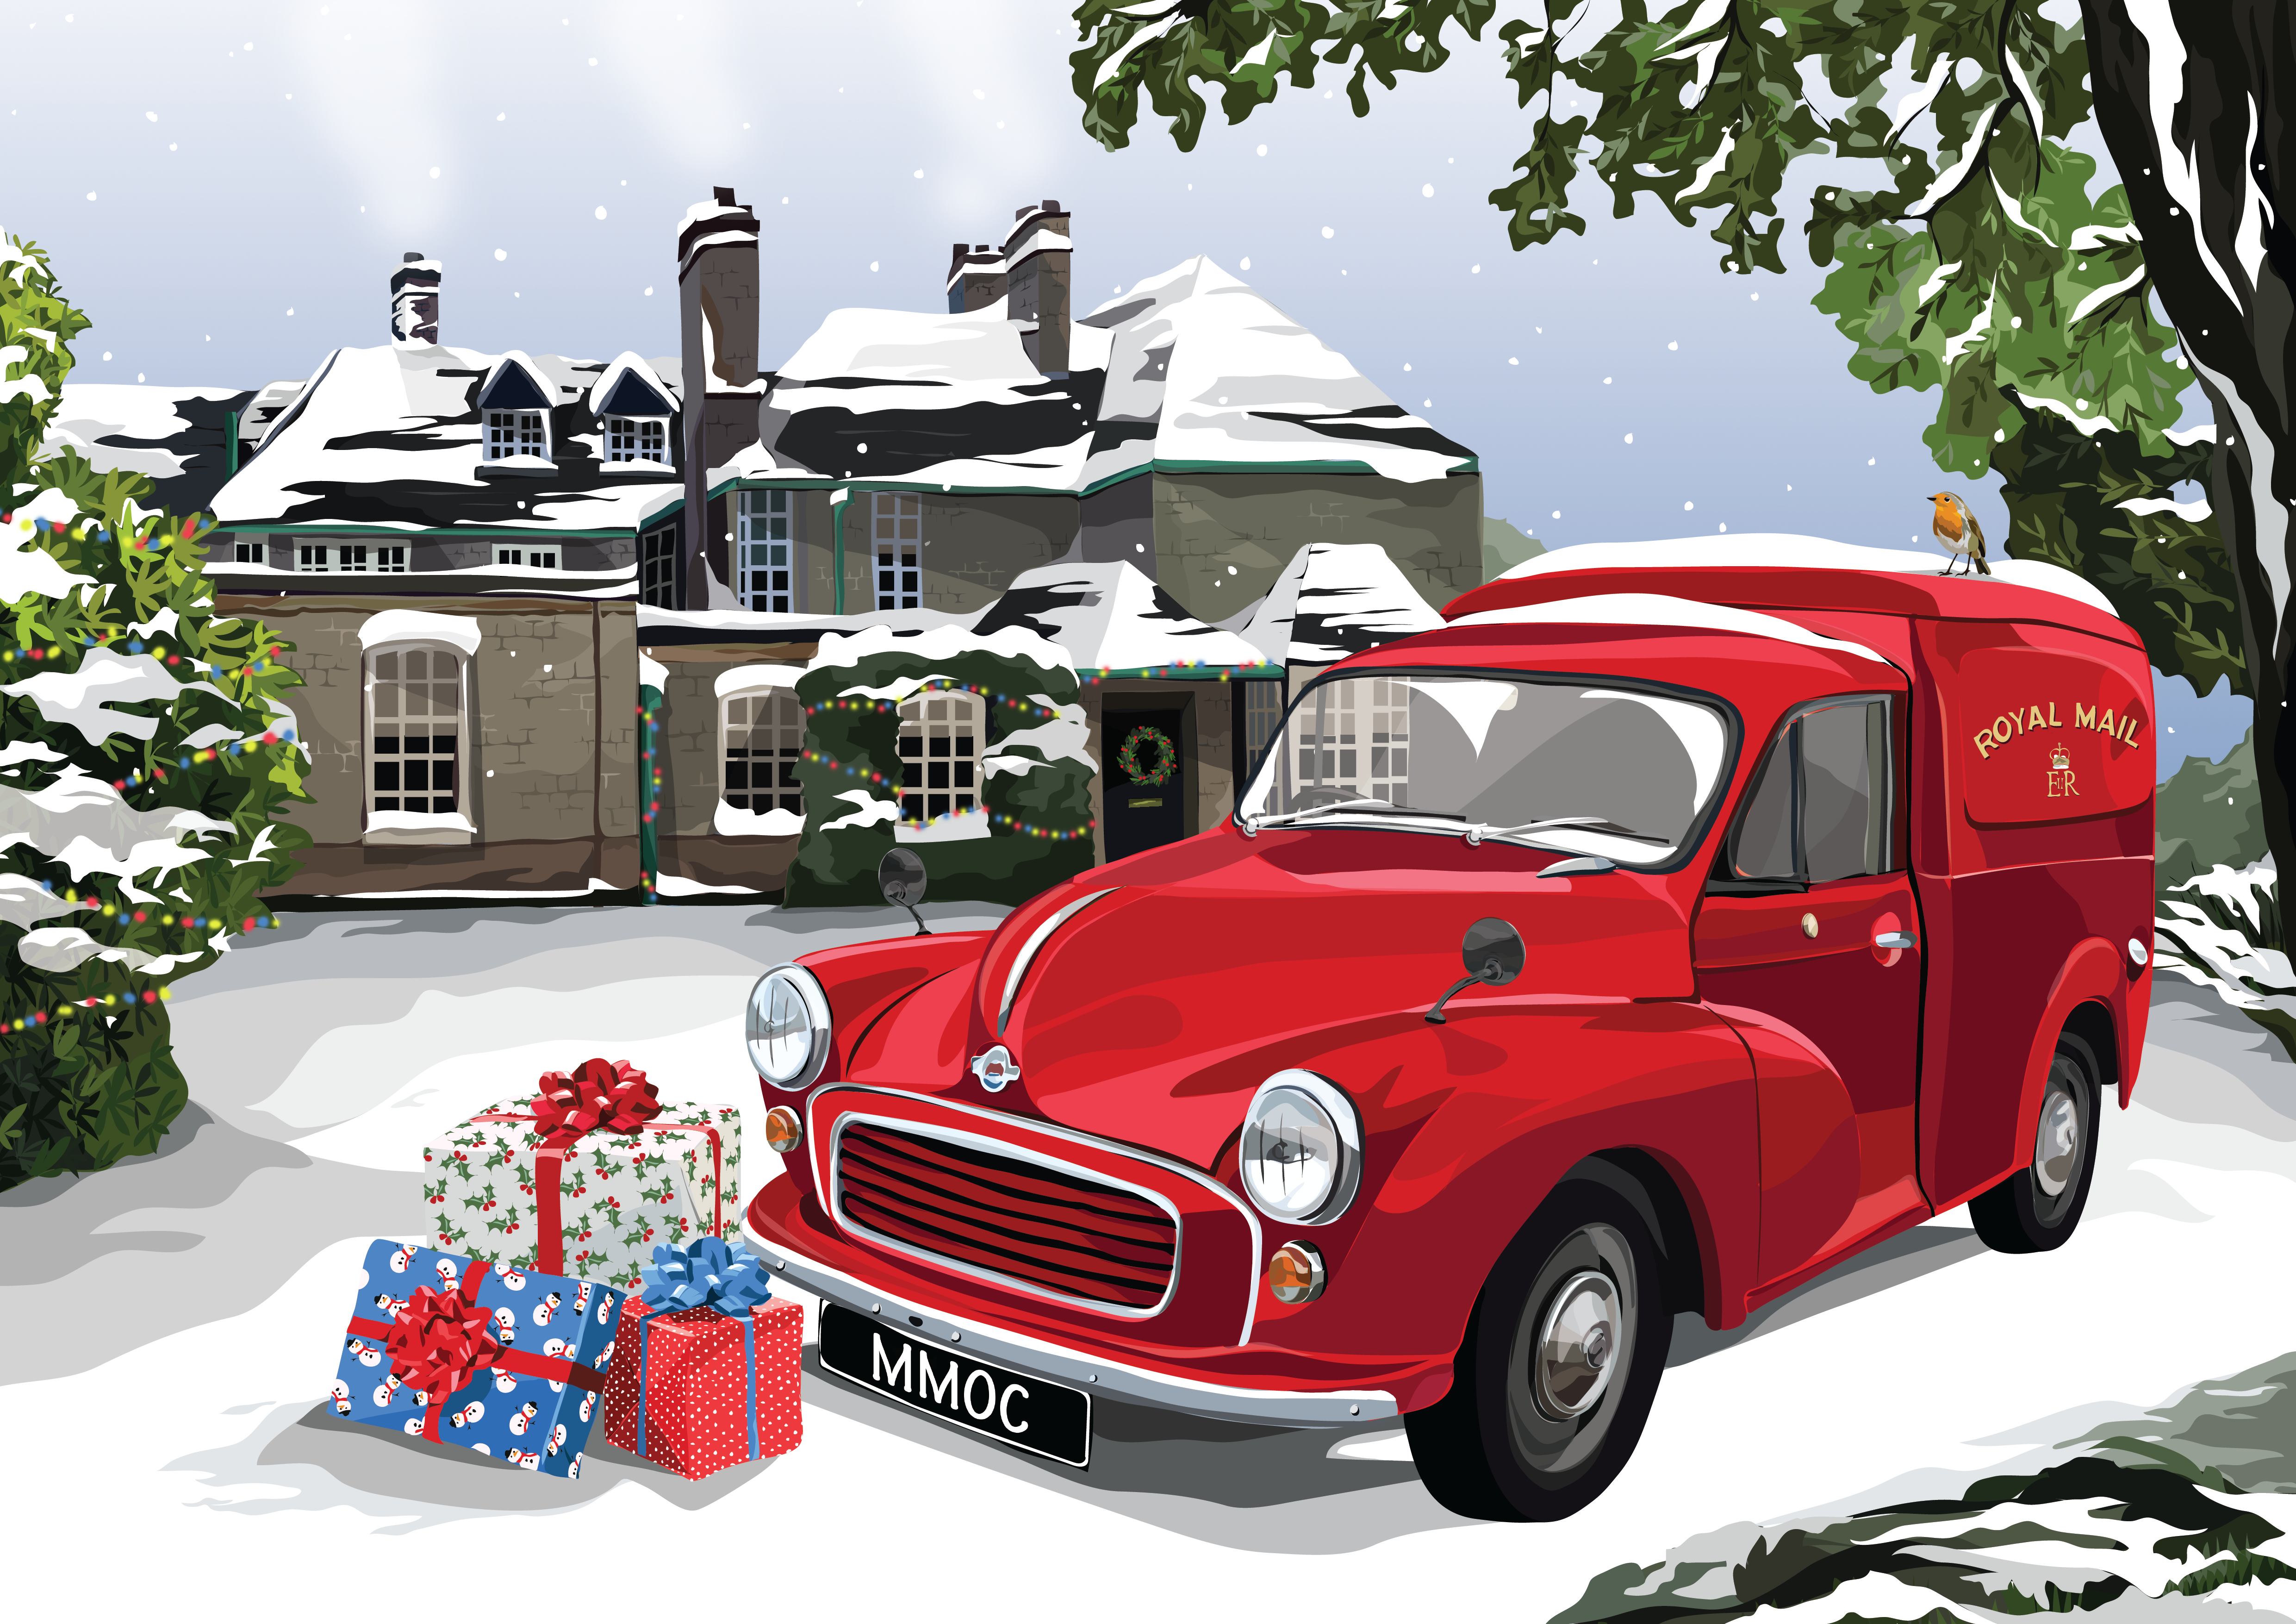 Christmas Cards - Nuffield Place